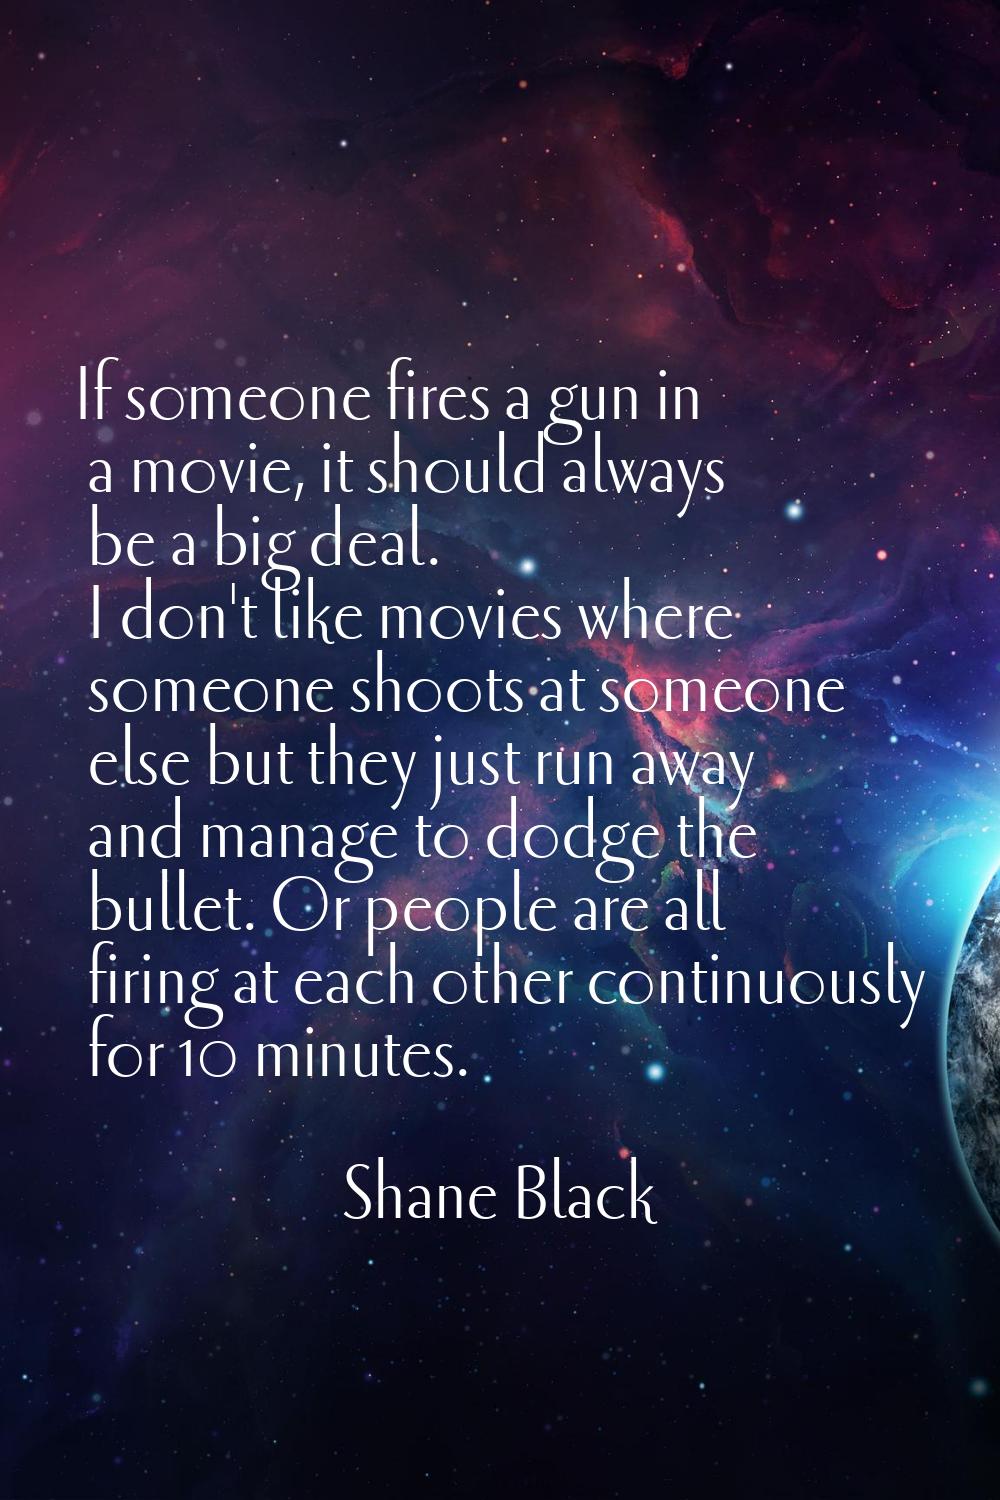 If someone fires a gun in a movie, it should always be a big deal. I don't like movies where someon